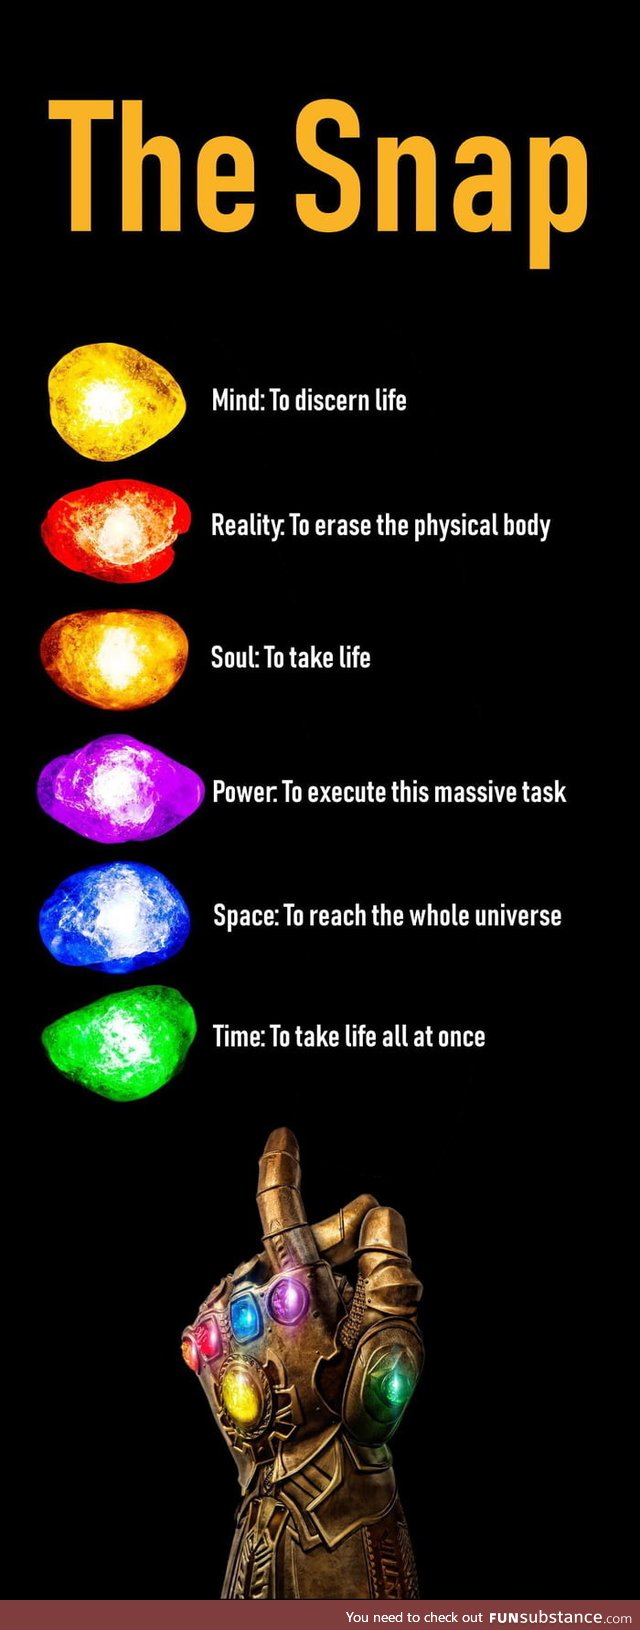 The role of each stone in the Snap